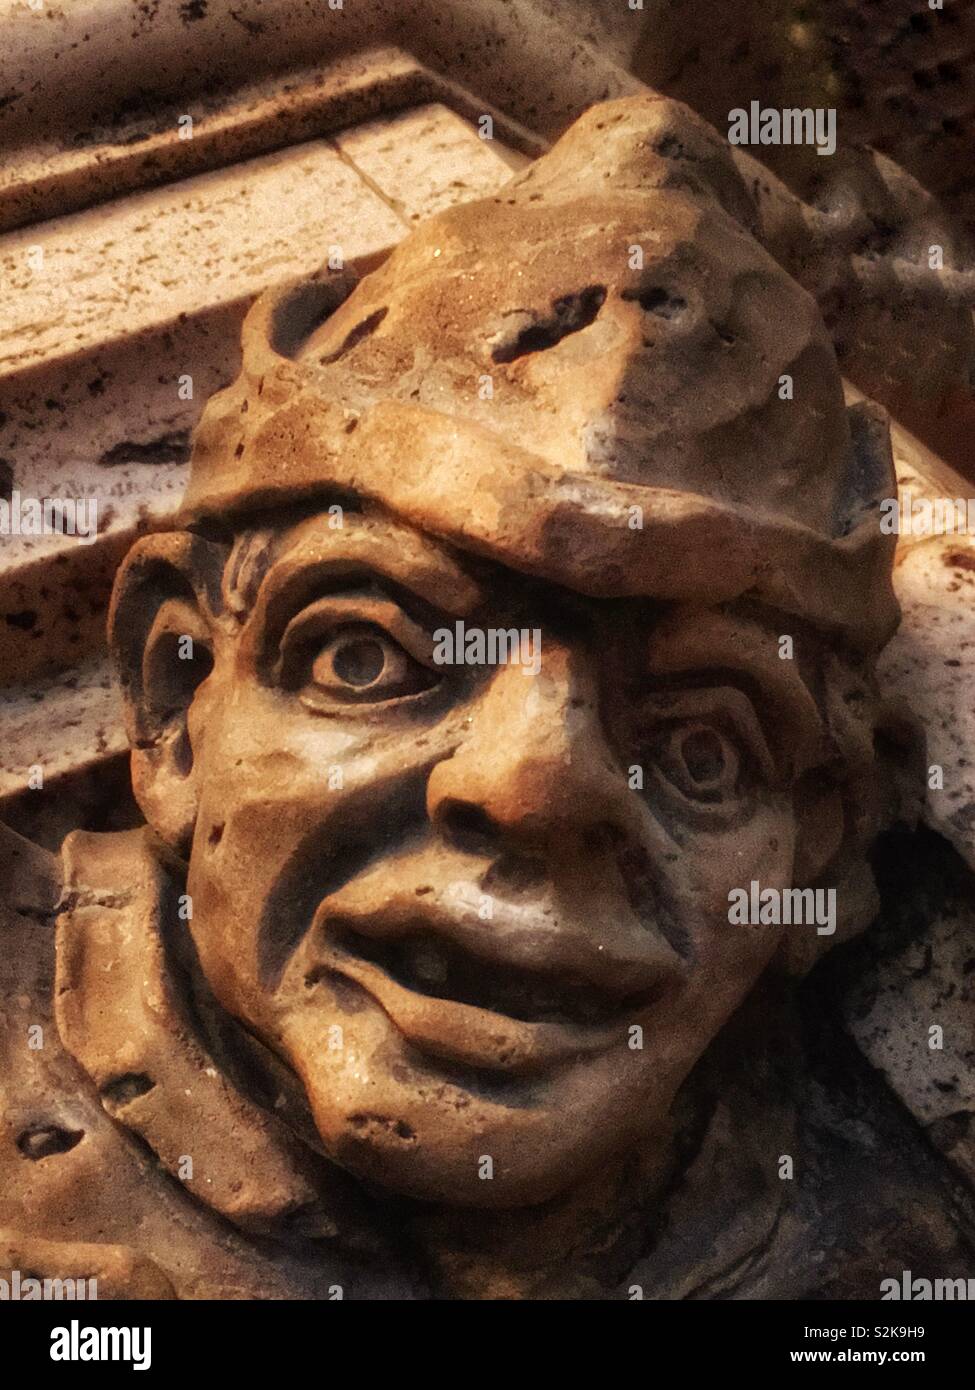 Interesting statue of the face of a hard working man laborer with lots of character. Stock Photo